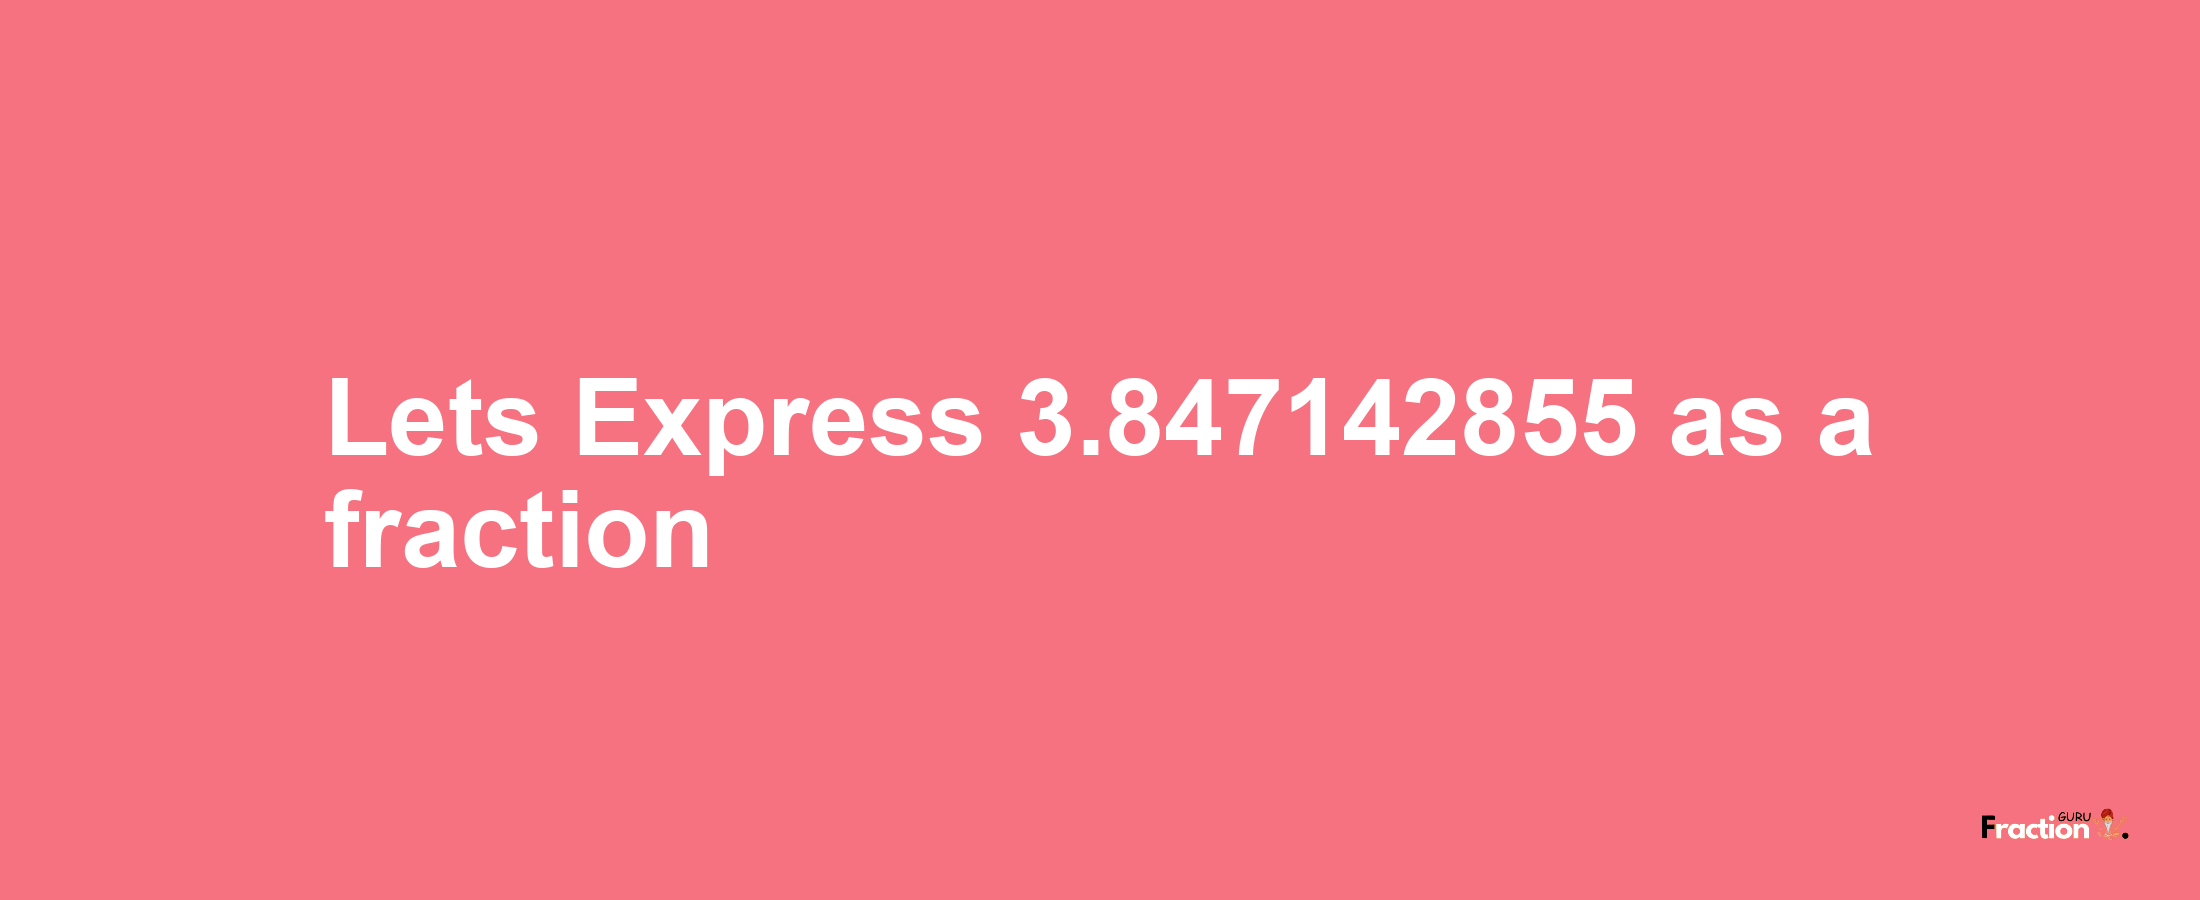 Lets Express 3.847142855 as afraction